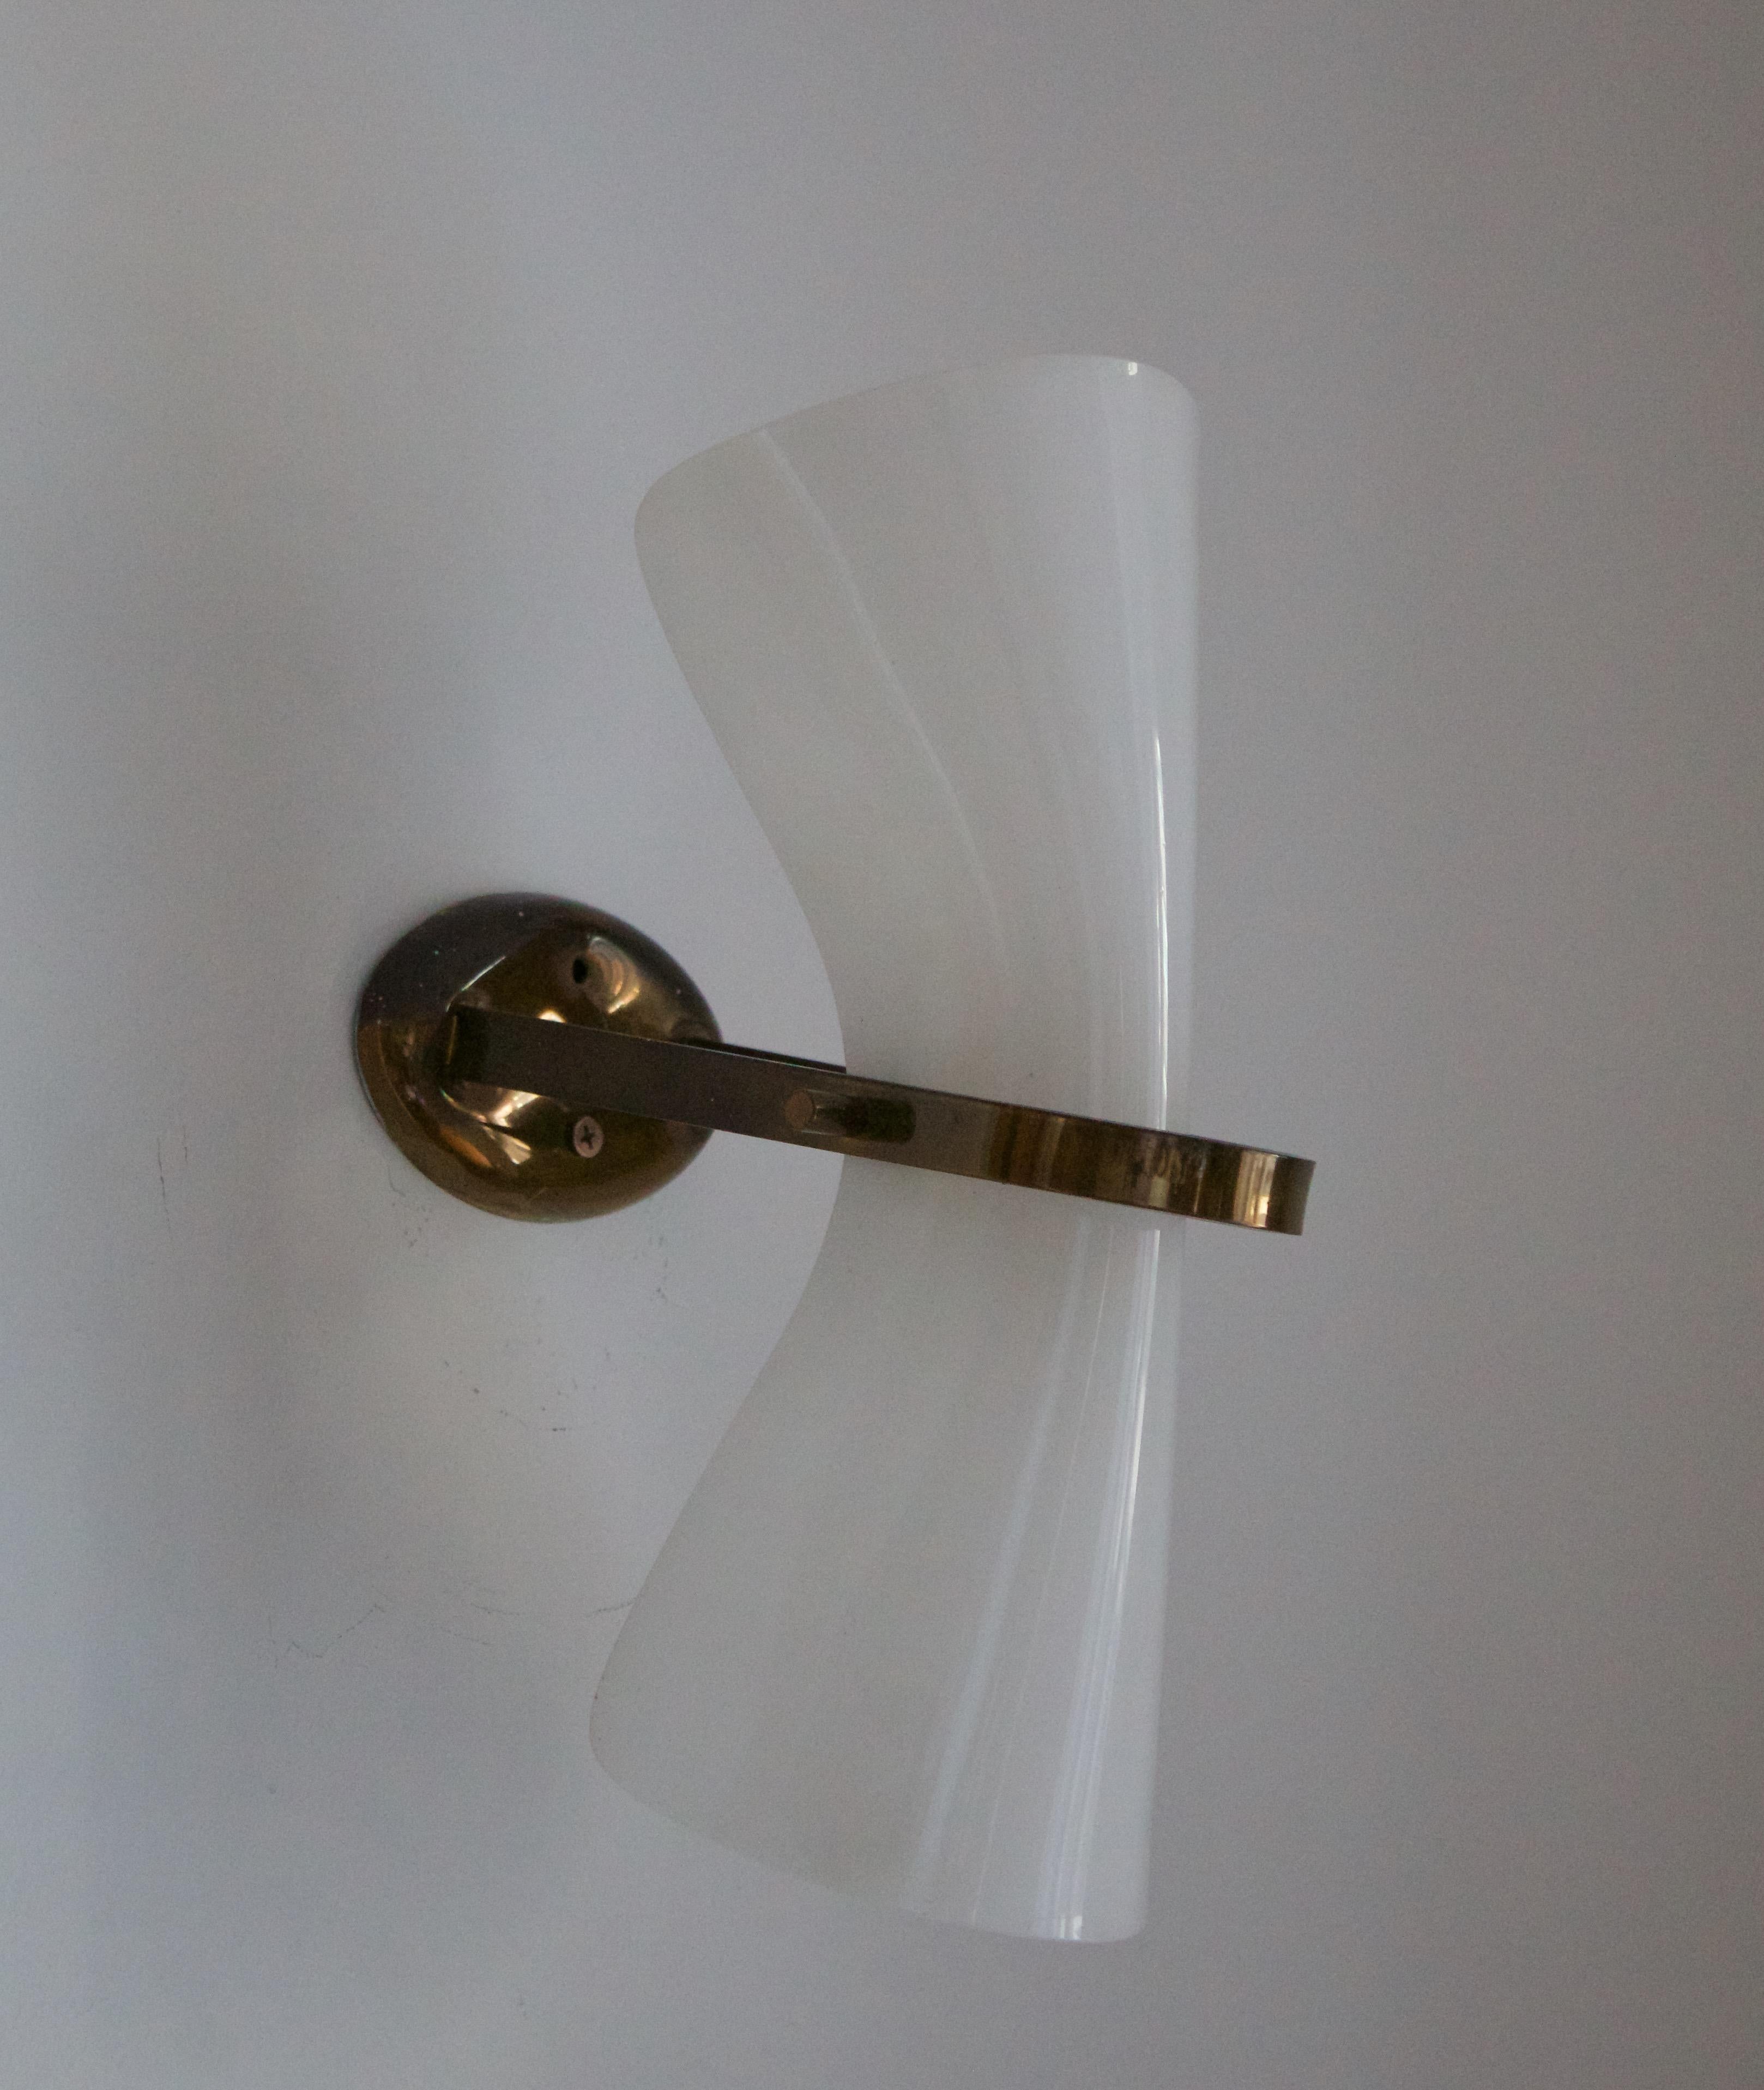 A wall light / Sconce. Designed and produced in Italy, c. 1960s.

Other designers of the period include Paavo Tynell, Jean Royère, Hans Bergström, Hans-Agne Jakobsson, and Kaare Klint.